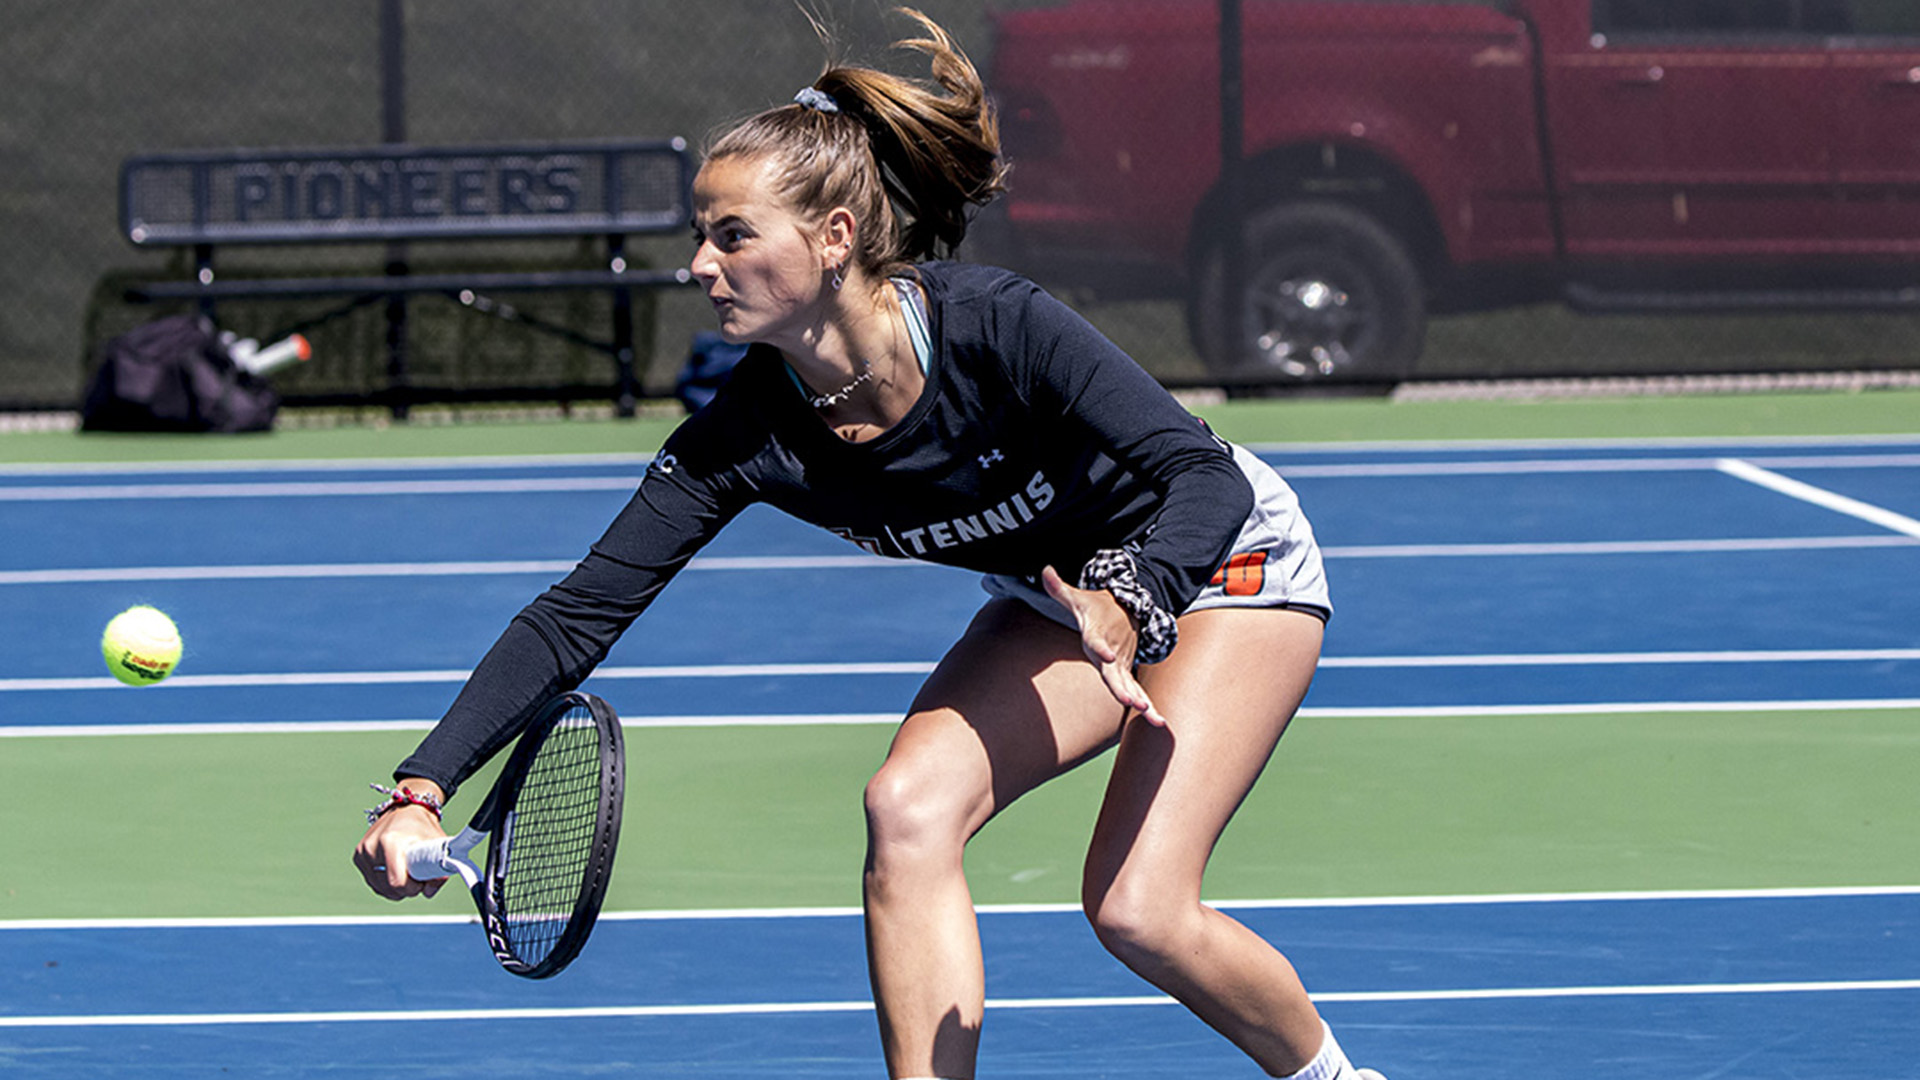 Martina Marras won in both singles and doubles against UVA Wise (photo by Chuck Williams)